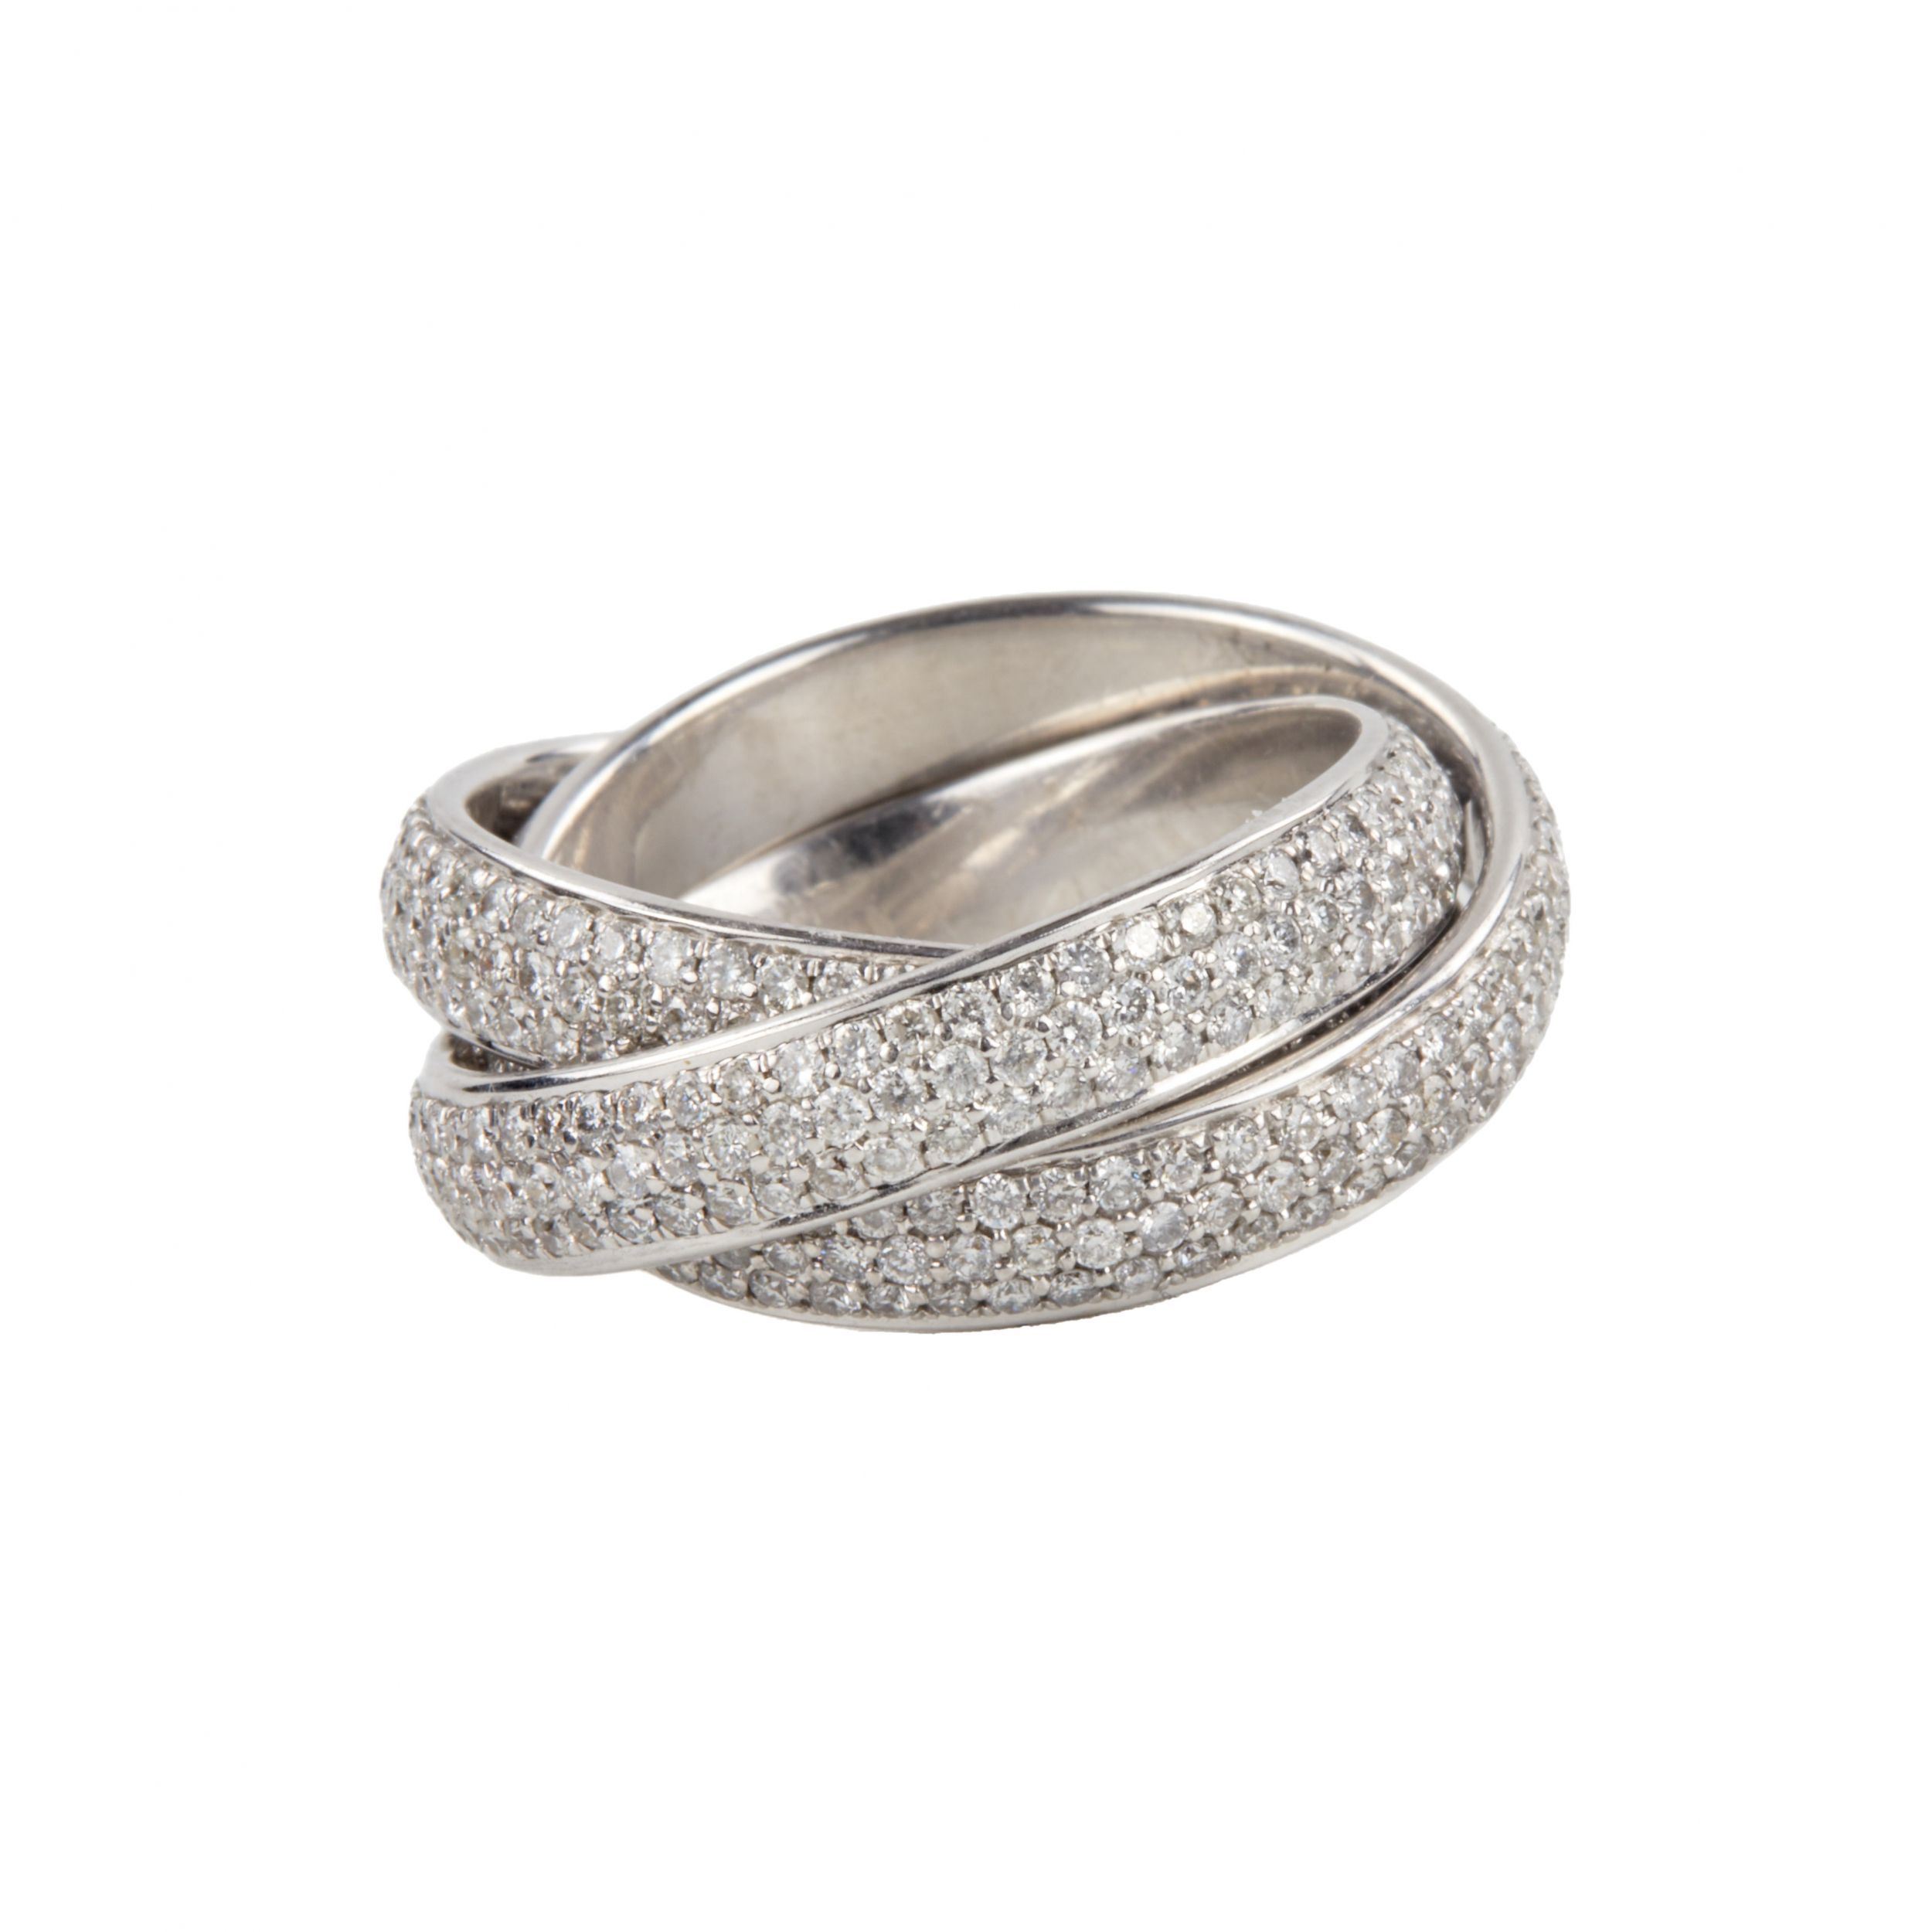 18K White gold ring with diamonds. - Image 3 of 6